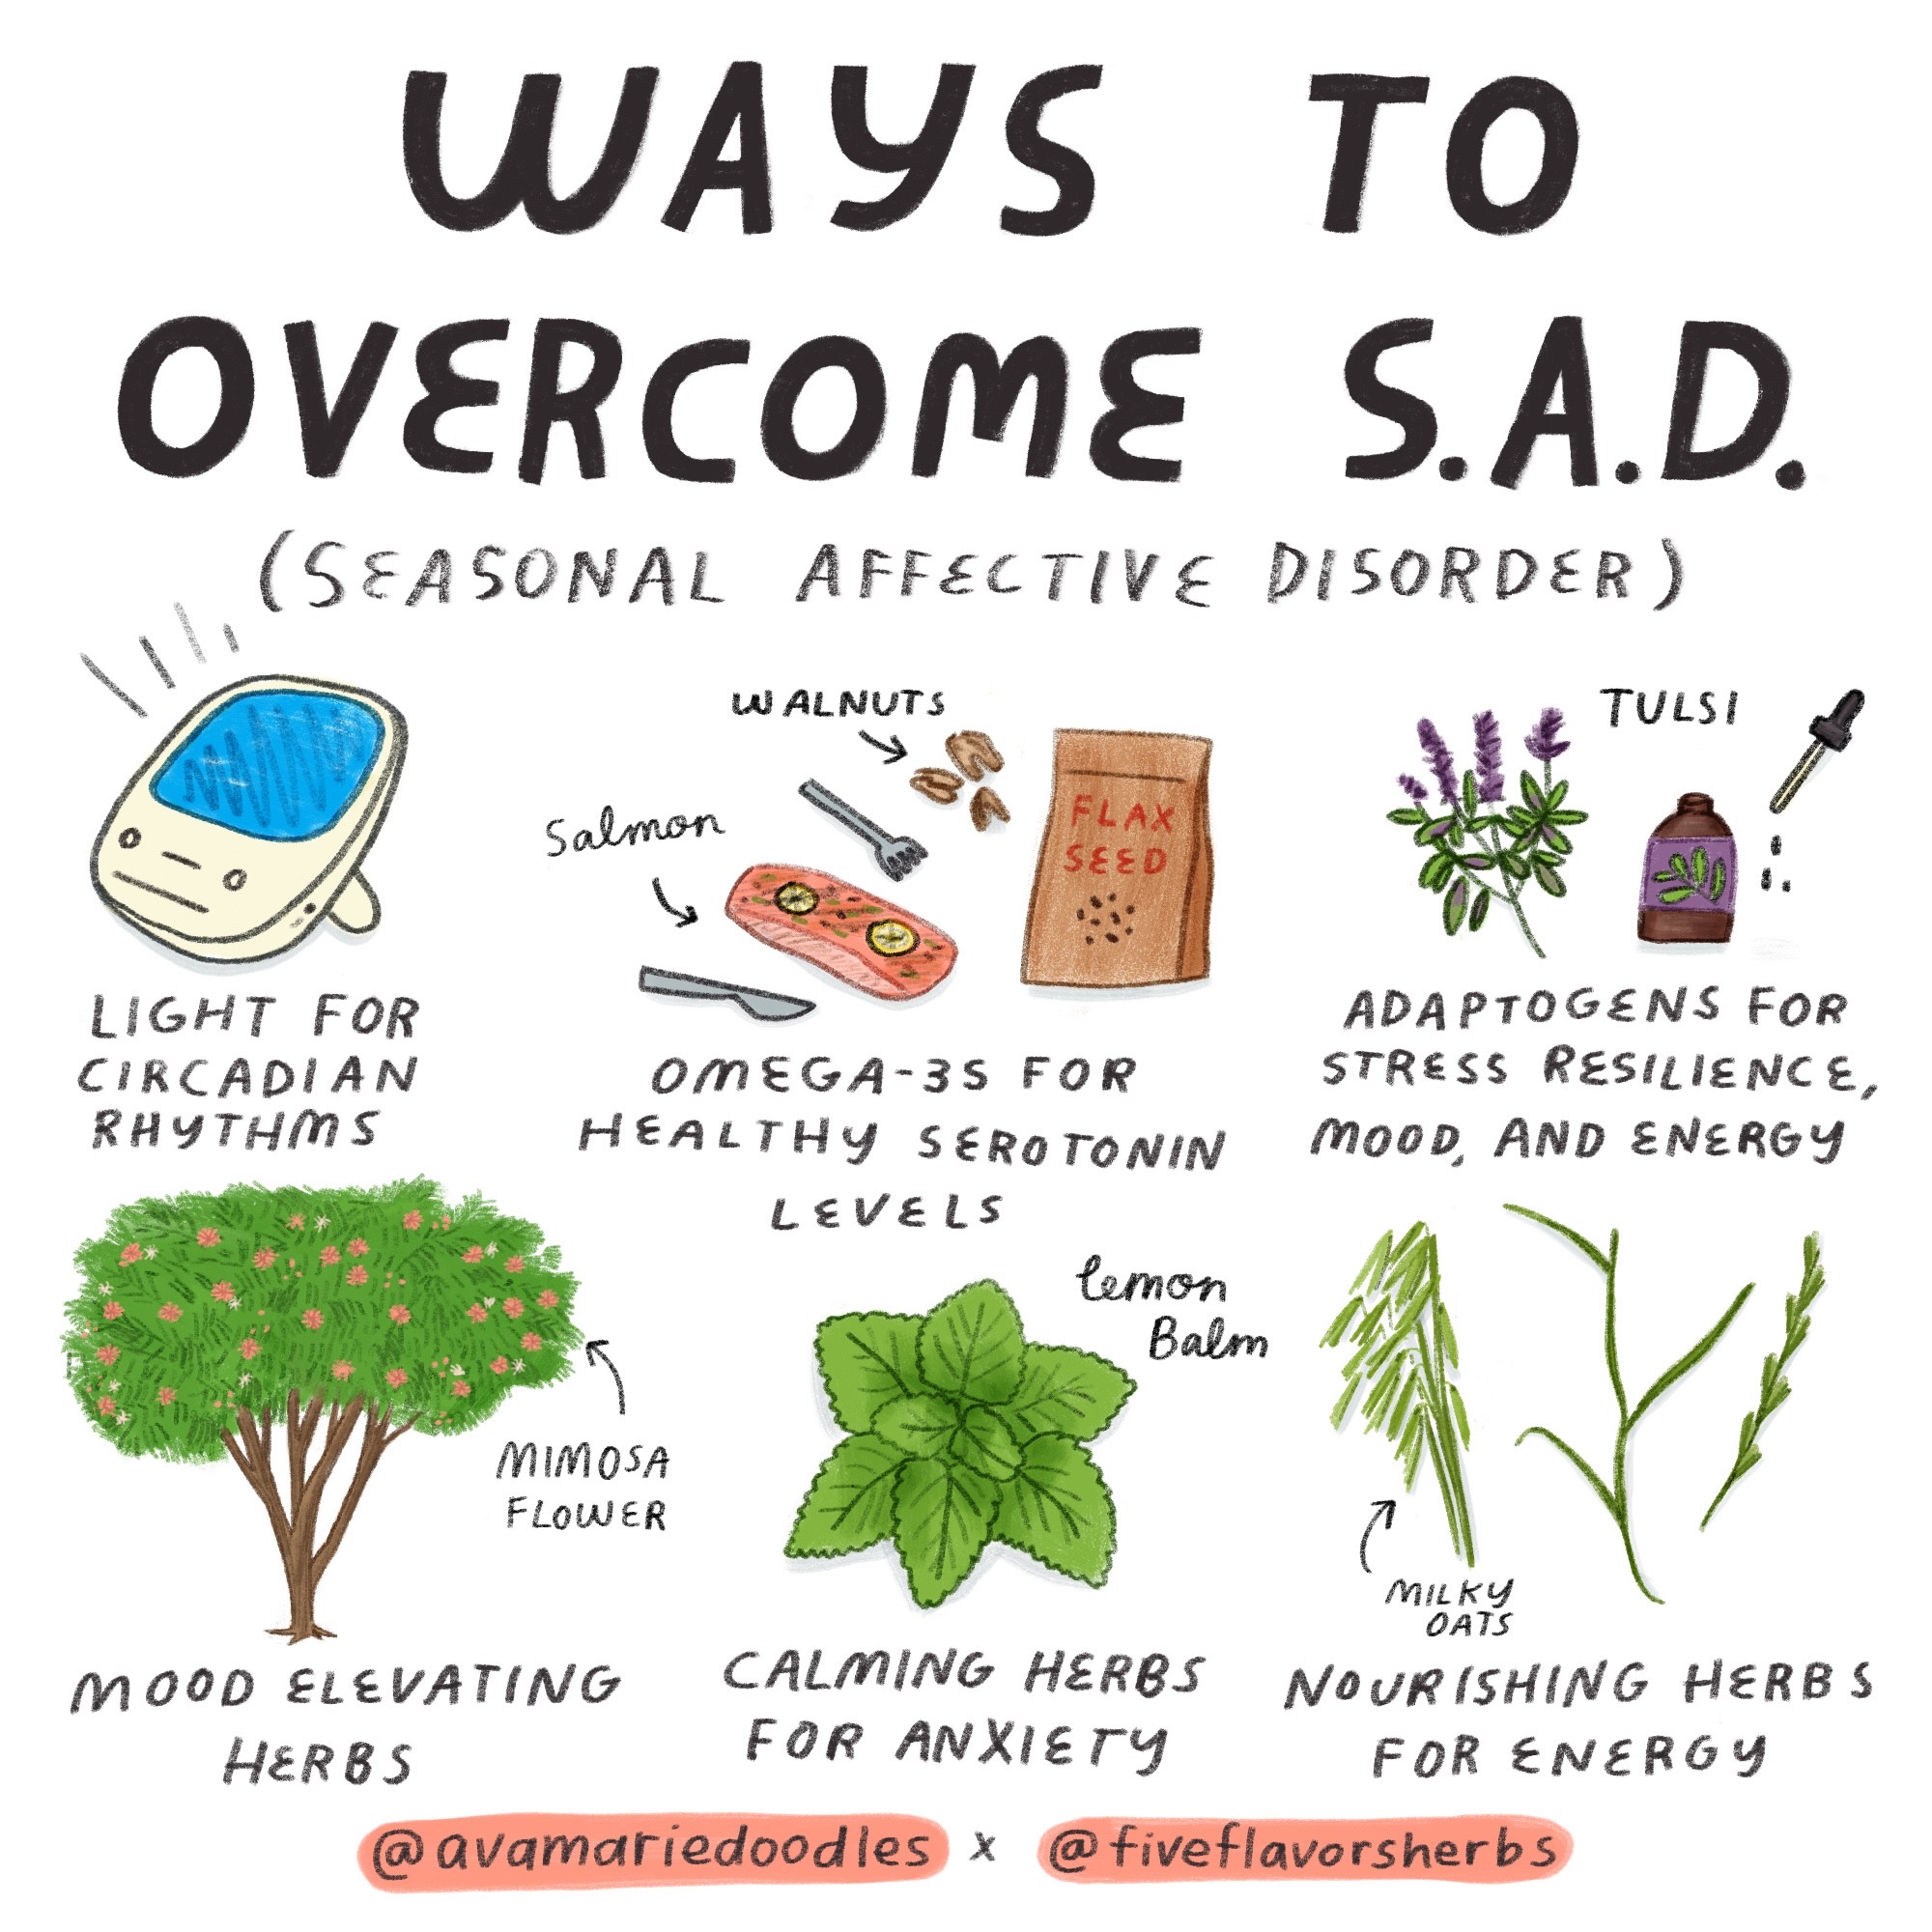 ways to overcome season affective disorder illustration with light therapy, herbs, and supplements from Ava Marie Doodles